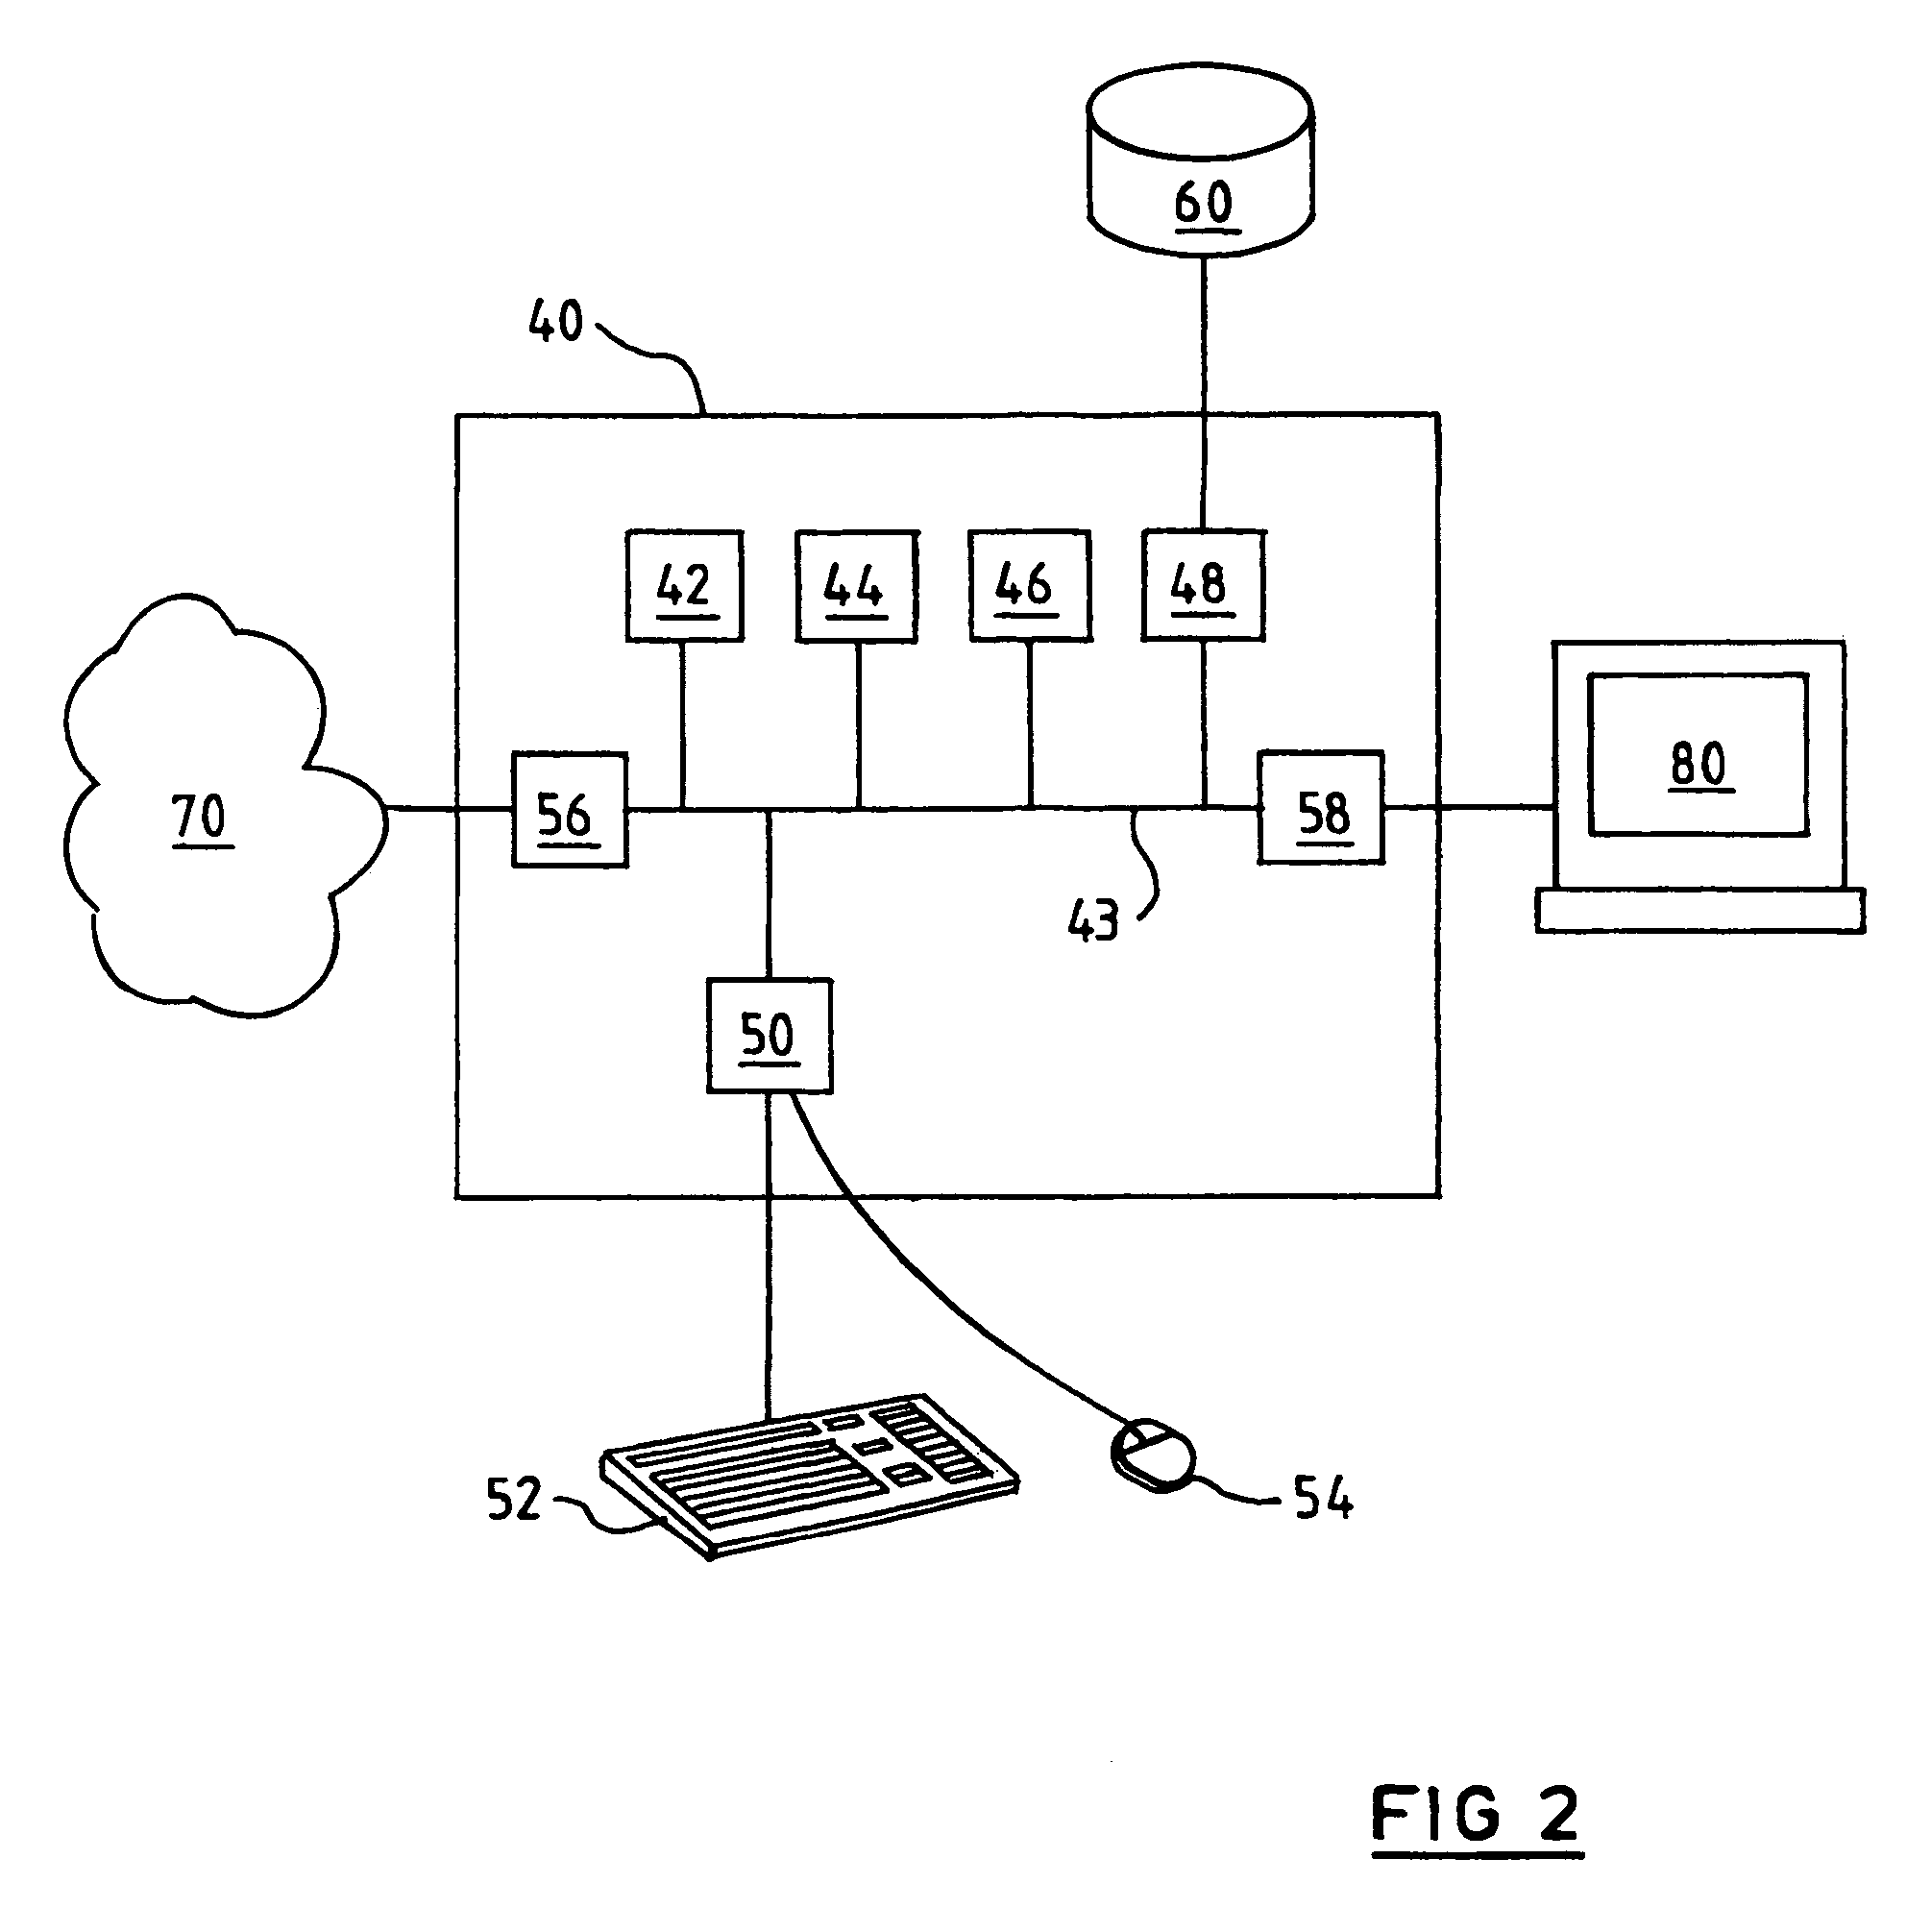 Method and system for enabling a server application to be executed in the same virtual machine as a client application using direct object oriented programming method calls